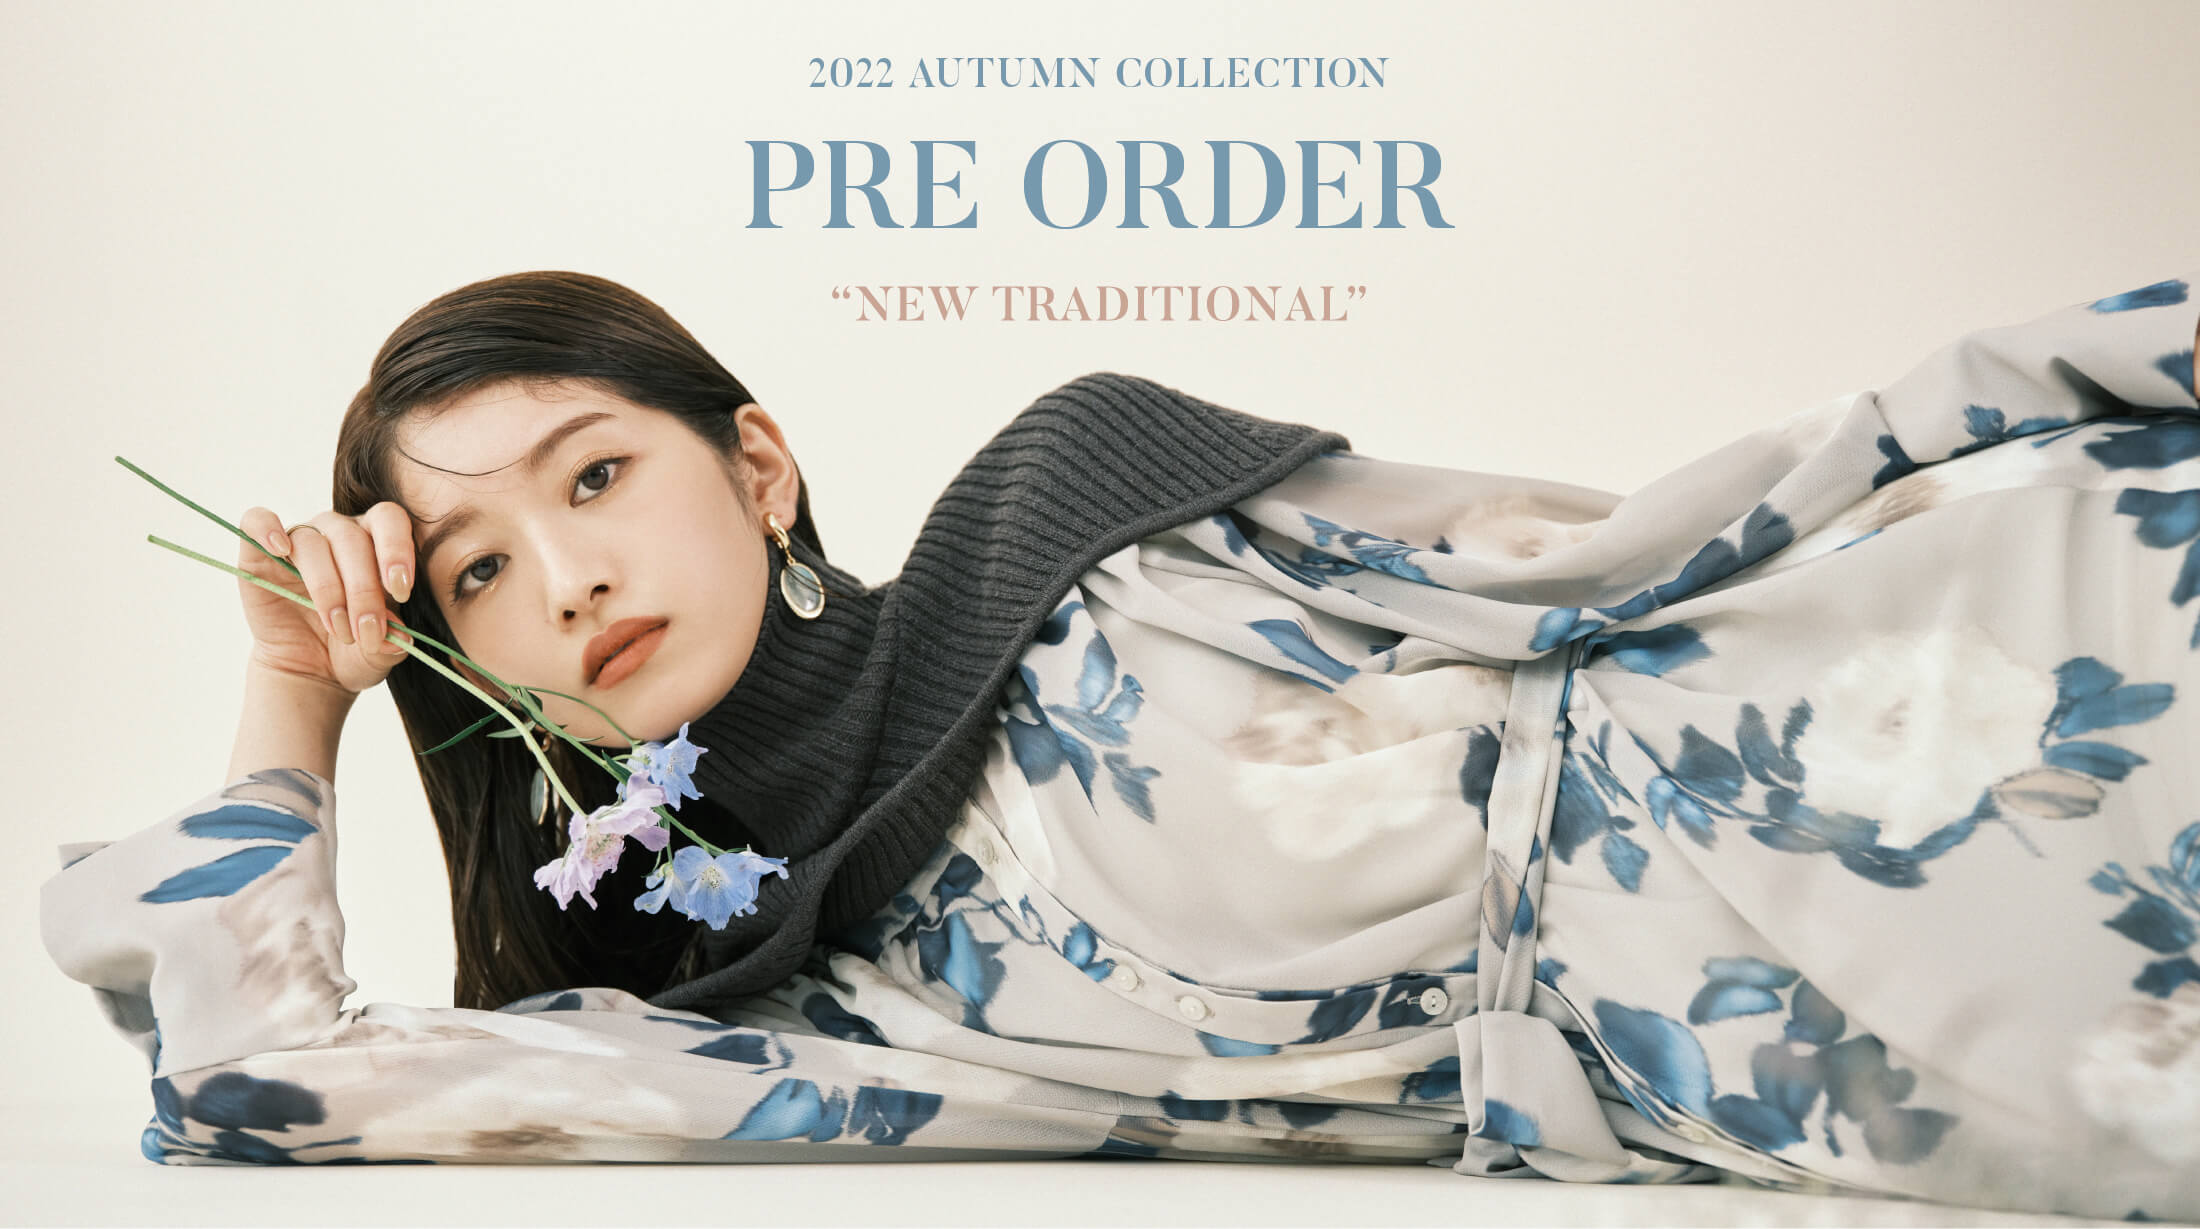 2022 AUTUMN COLLECTION PRE ORDER NEW TRADITIONAL